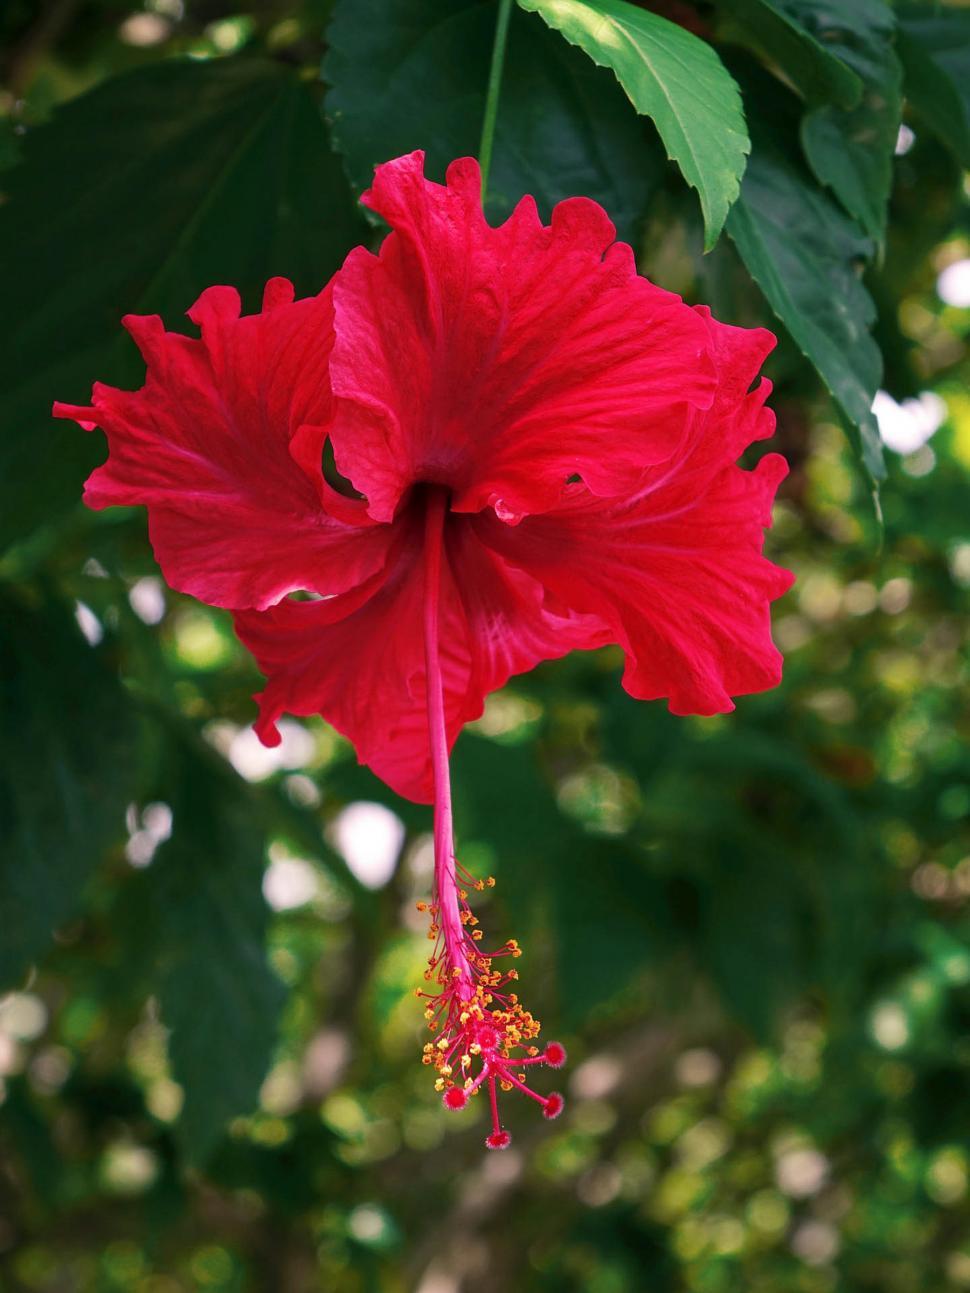 Free Image of Large Red Flower Hanging From a Tree 